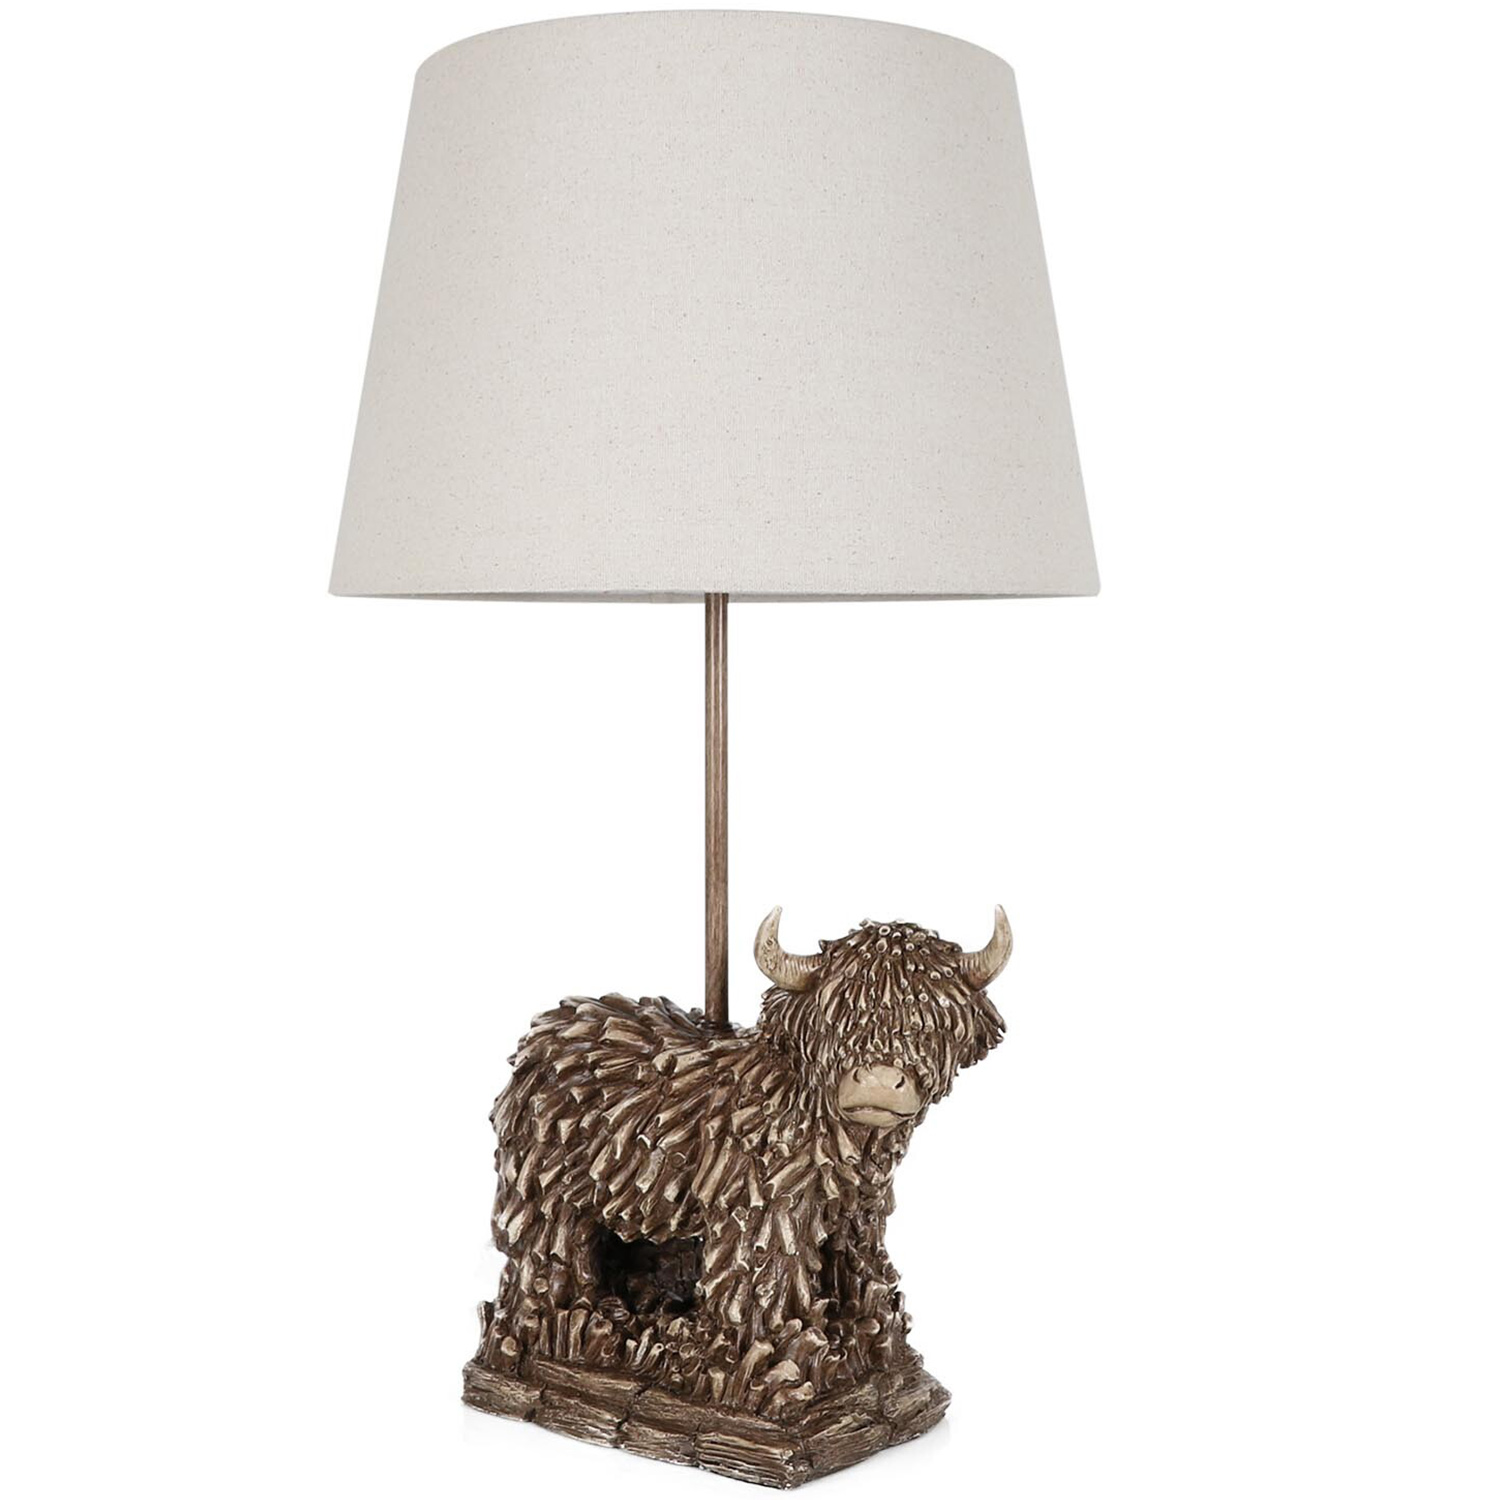 White and Antique Brass Effect Cow Table Lamp Image 1